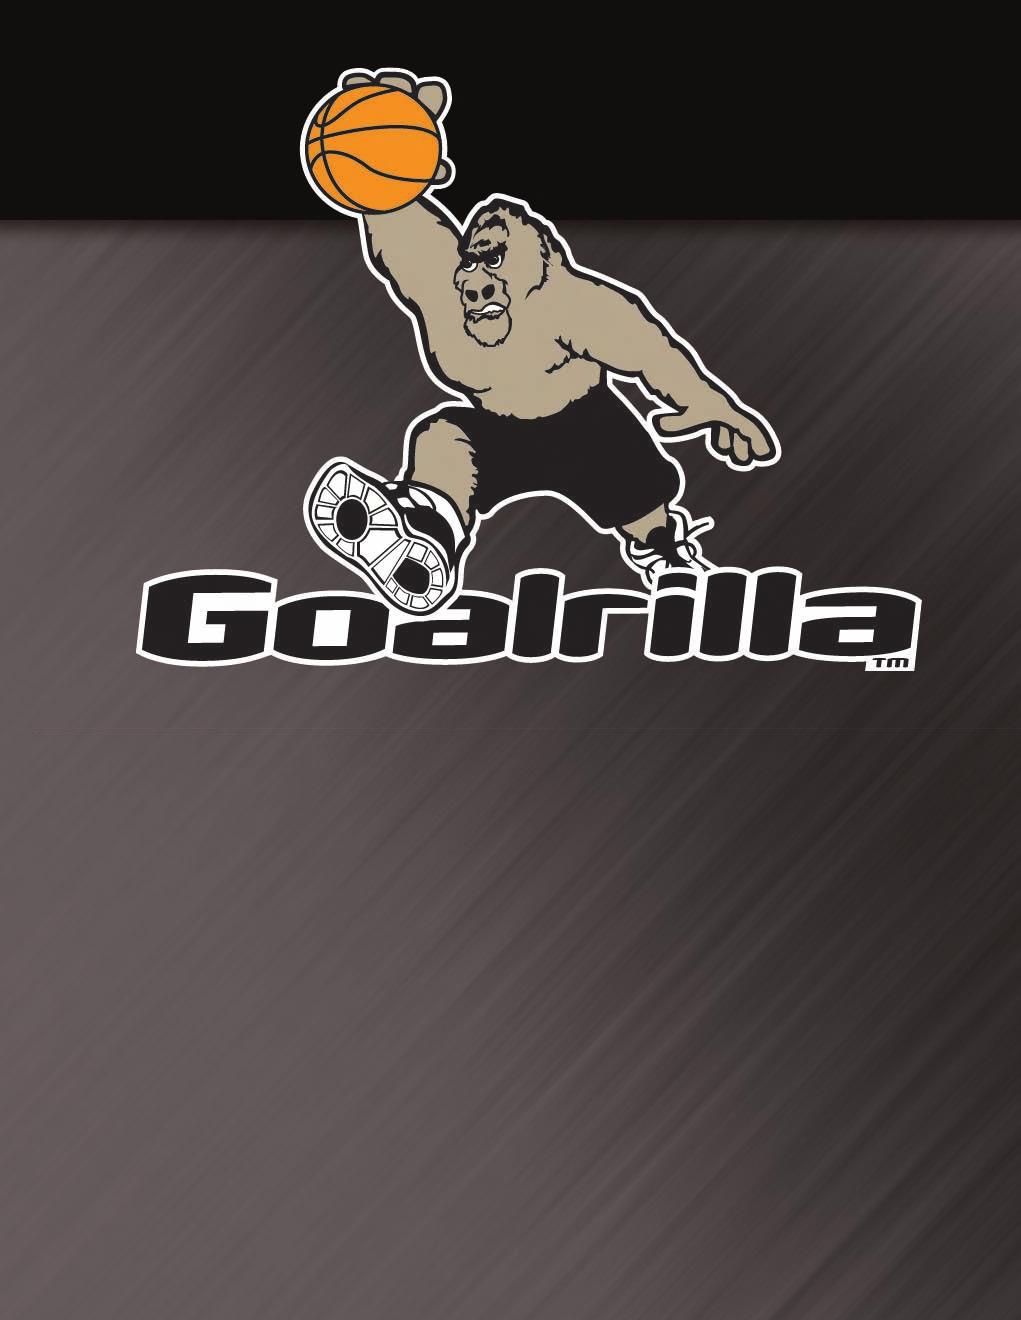 THE GOALRILLA STORY Introduced in 1994 Consistent positioning message The Toughest Basketball System on the Planet